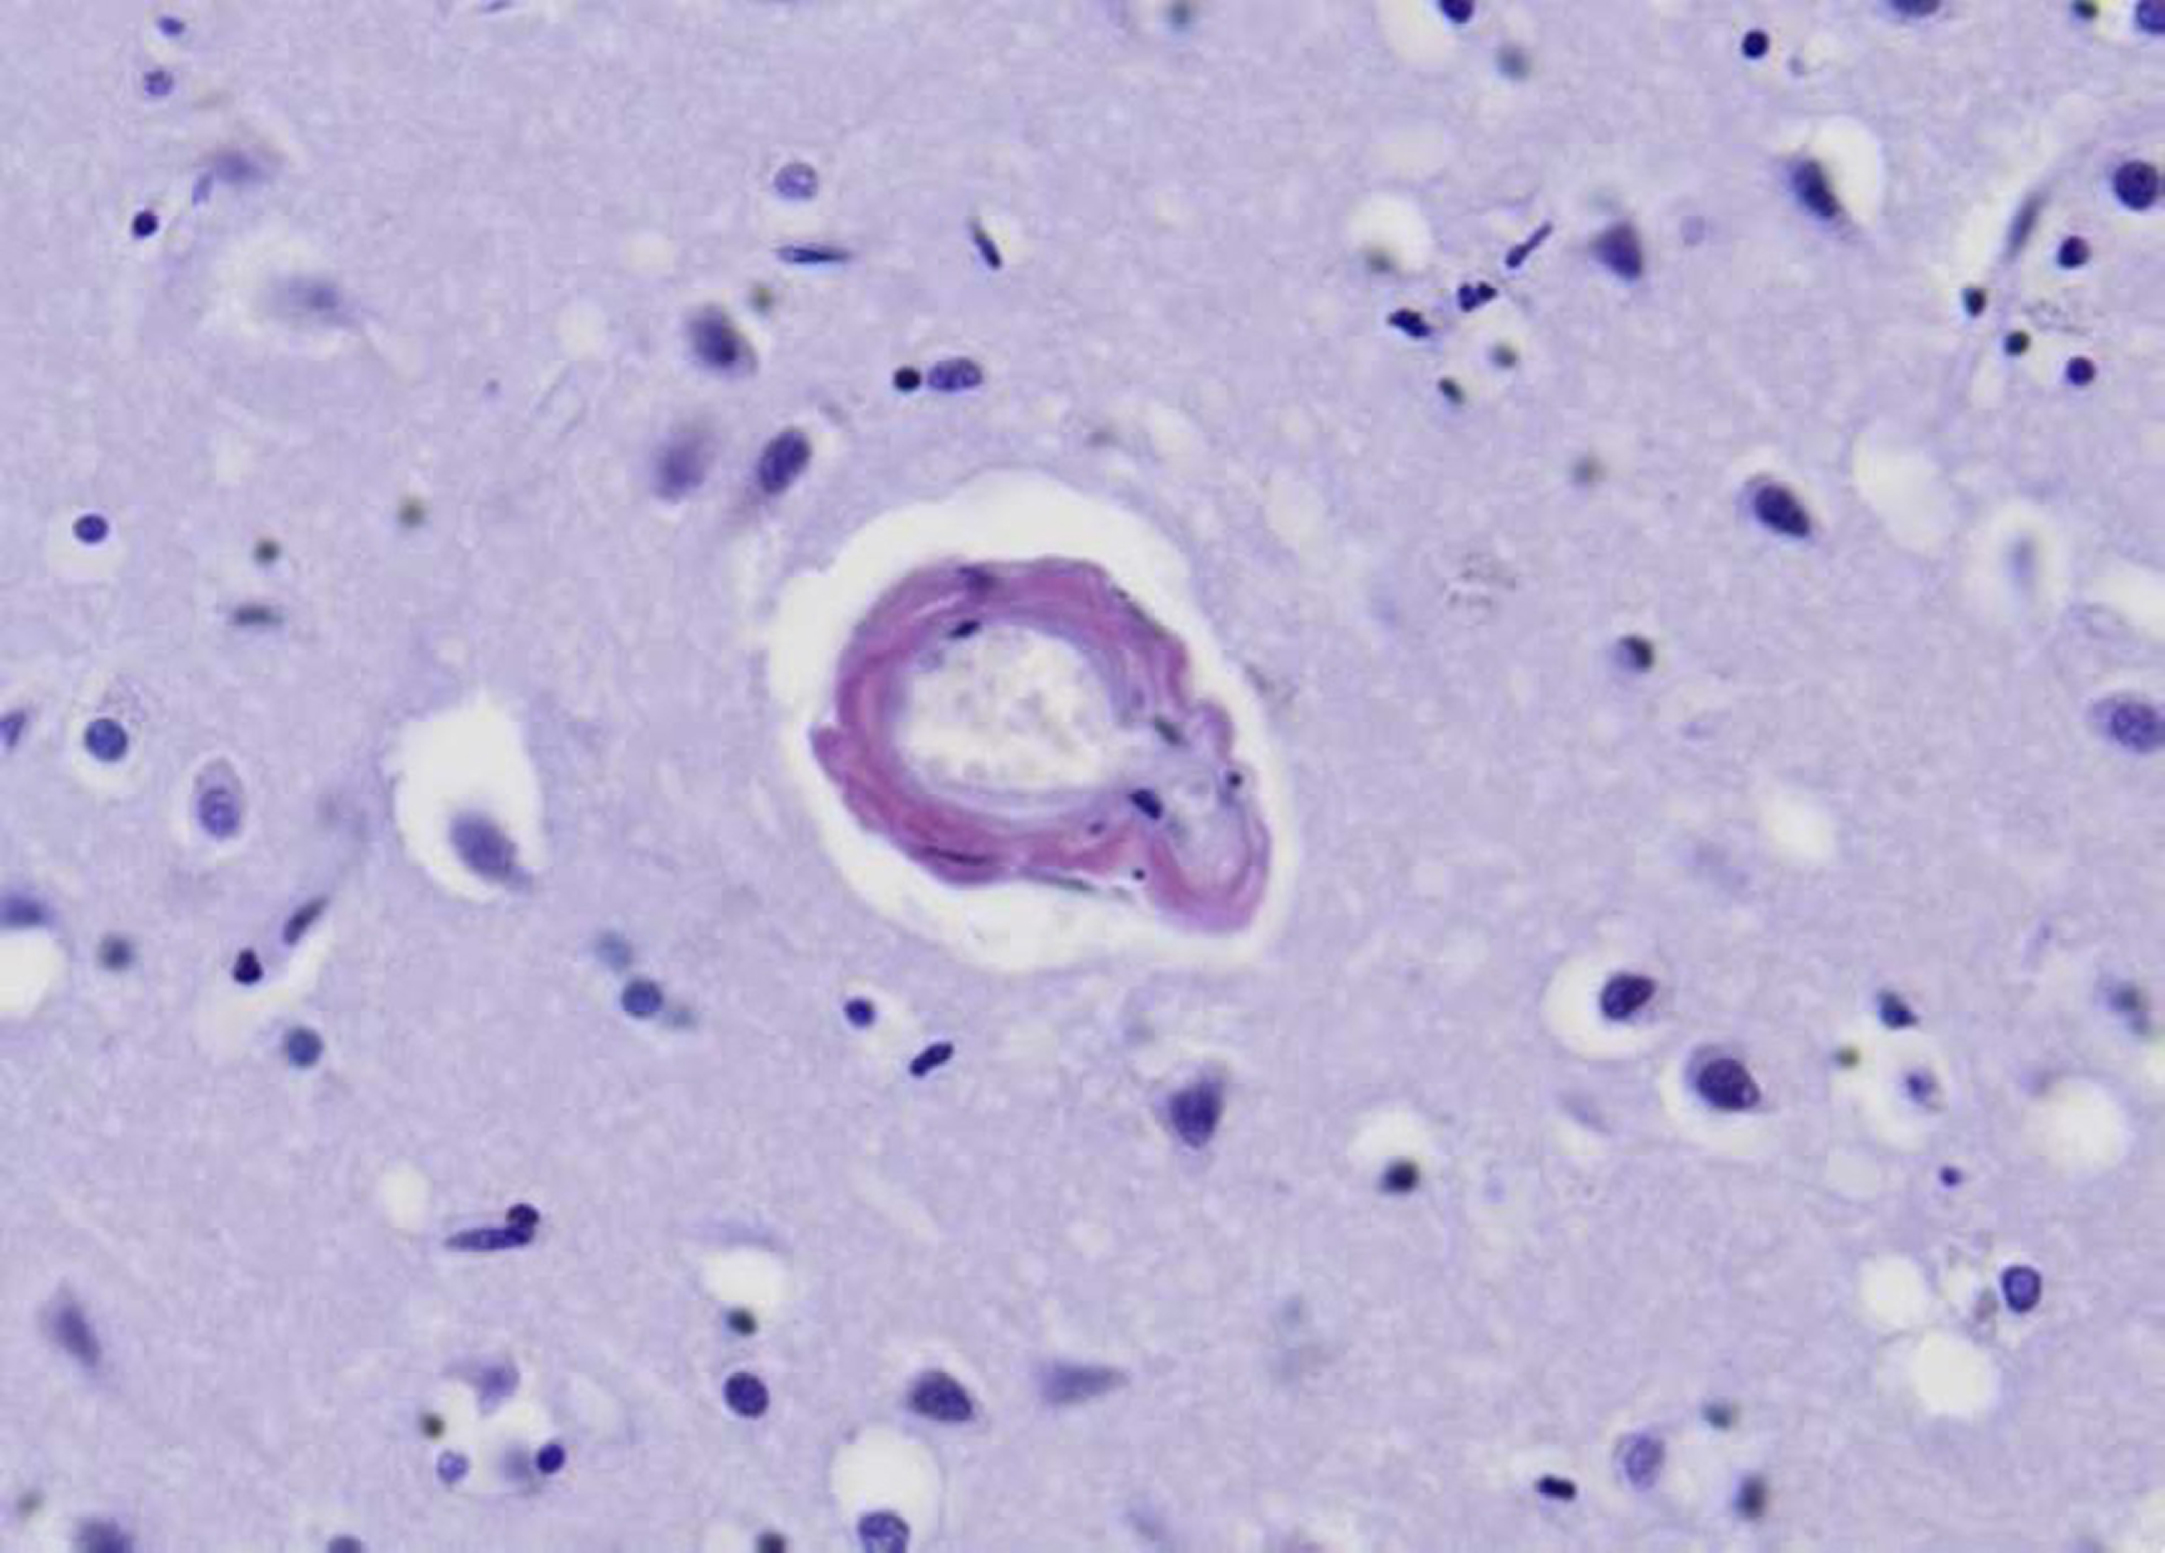 Amyloid special stain showing vascular amyloid deposition in a cortical leptomeningeal vessel with preservation of some vascular smooth muscle cells, corresponding to CAA grade 1. Note the vascular microaneurysm.